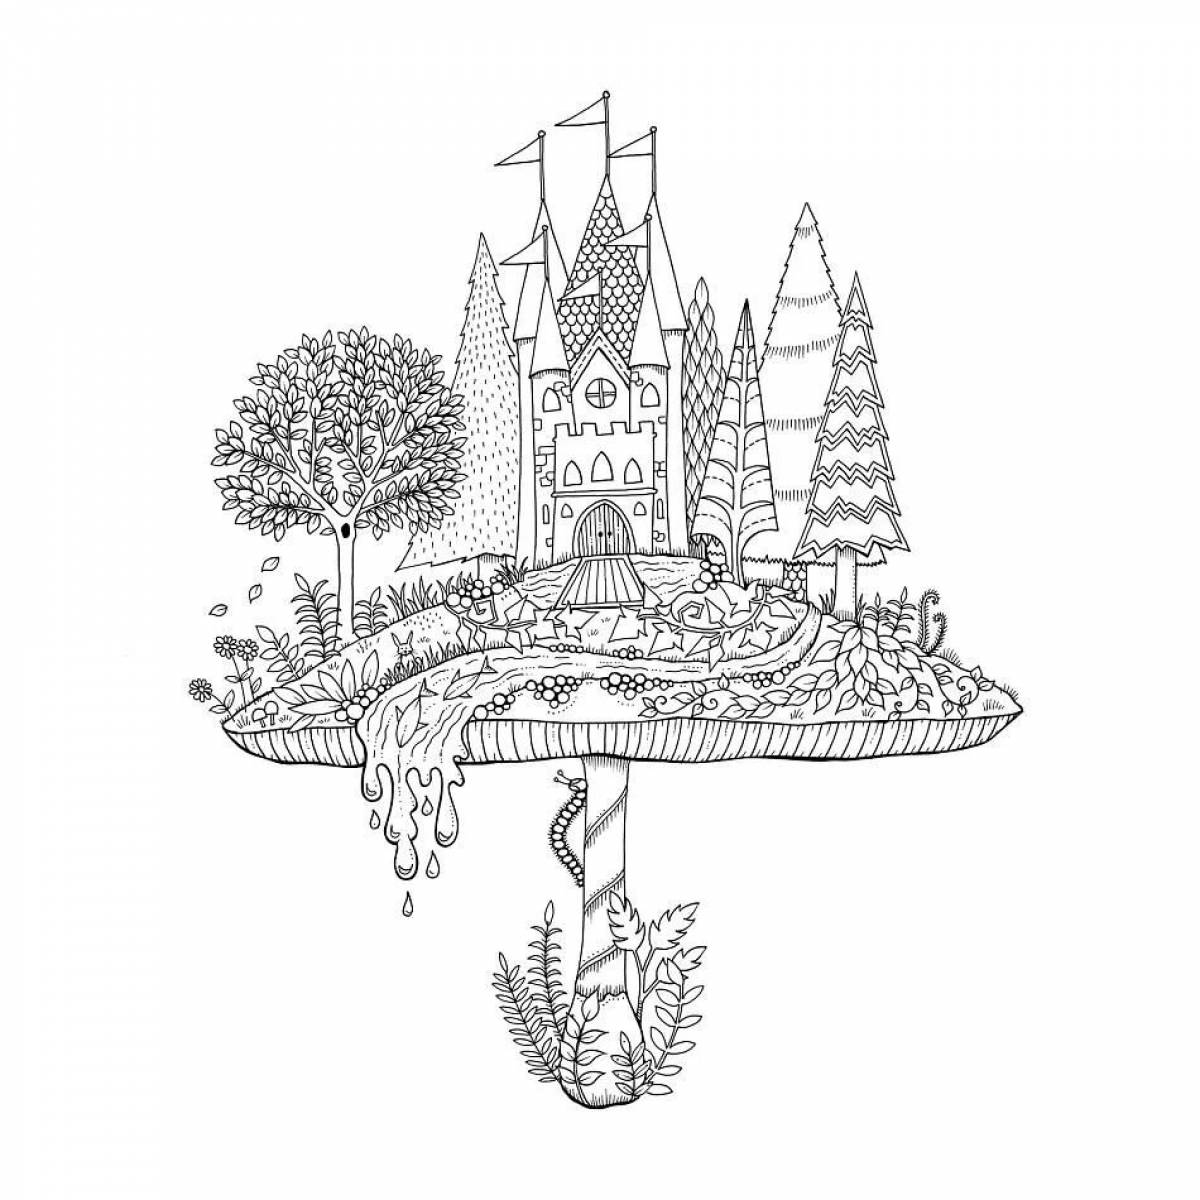 Luminous anti-stress forest coloring book